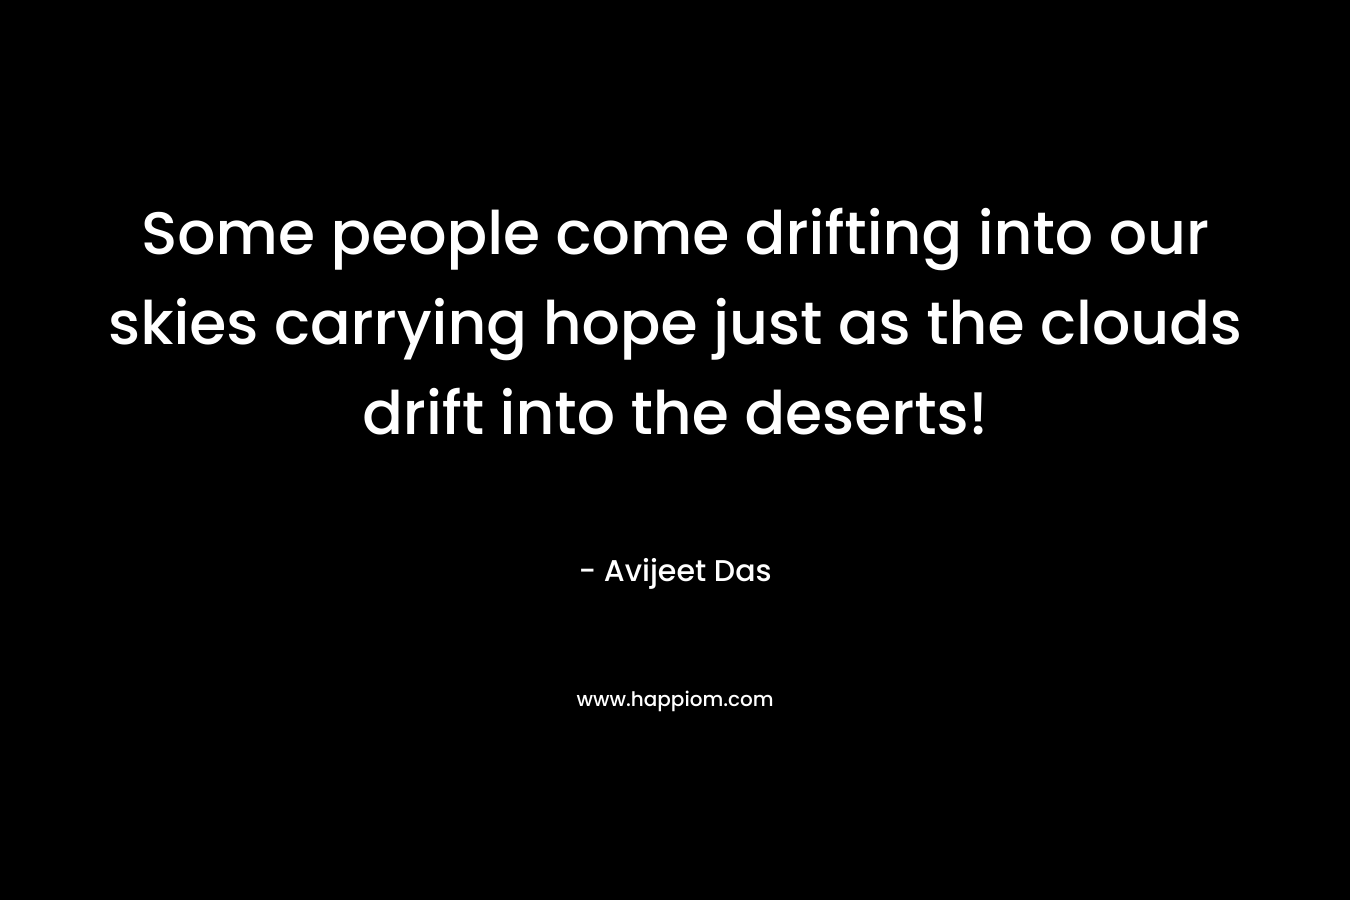 Some people come drifting into our skies carrying hope just as the clouds drift into the deserts!